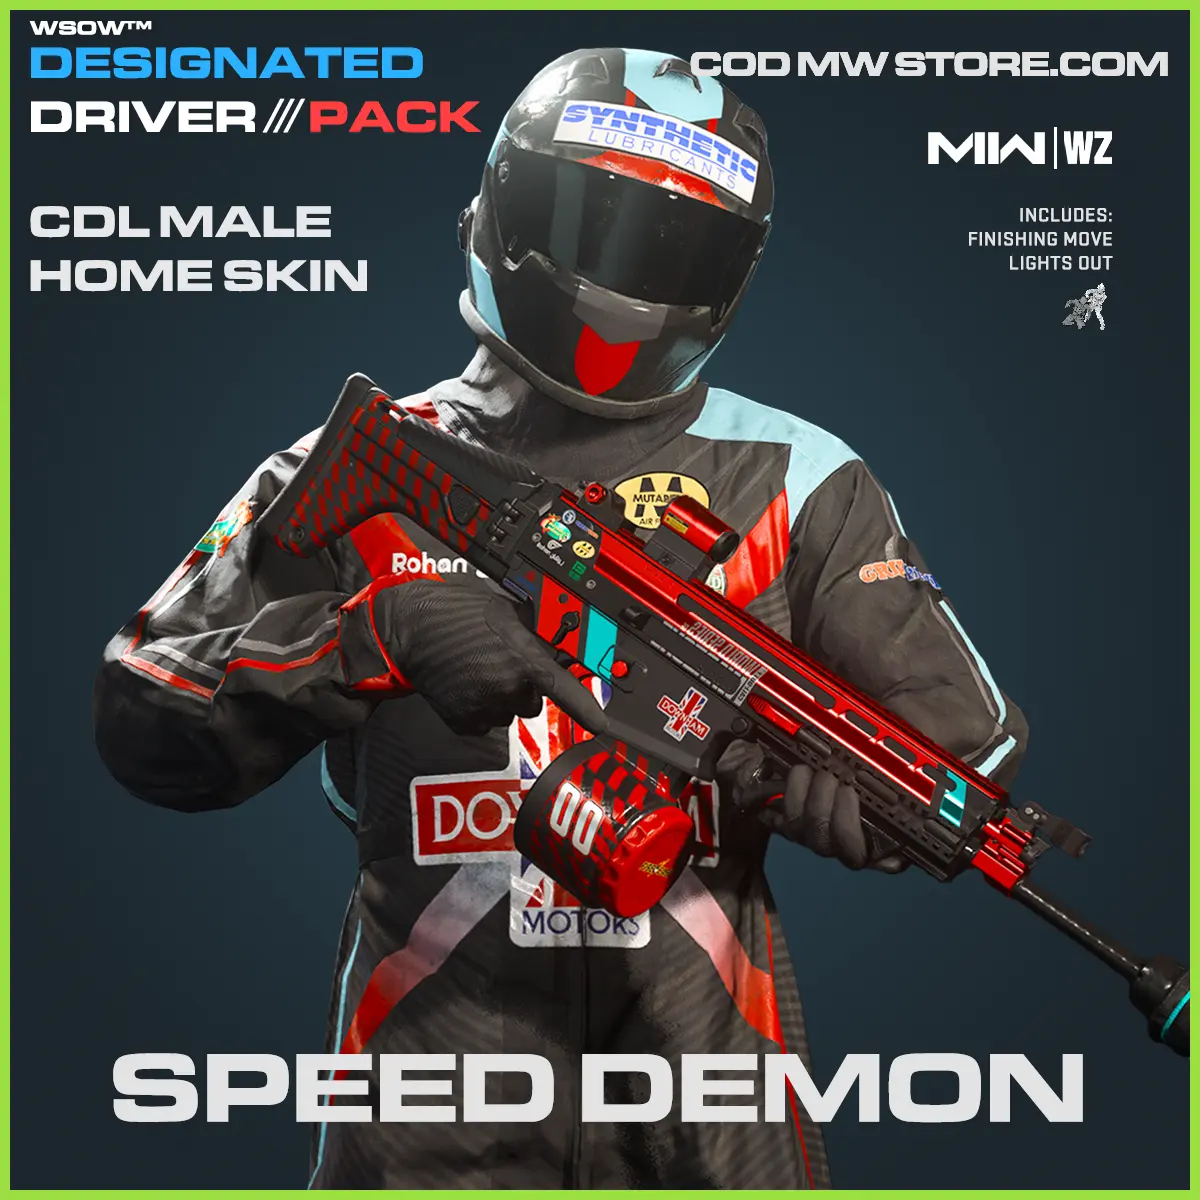 Free Designated Driver Operator Bundle in Call of Duty MW2 Warzone